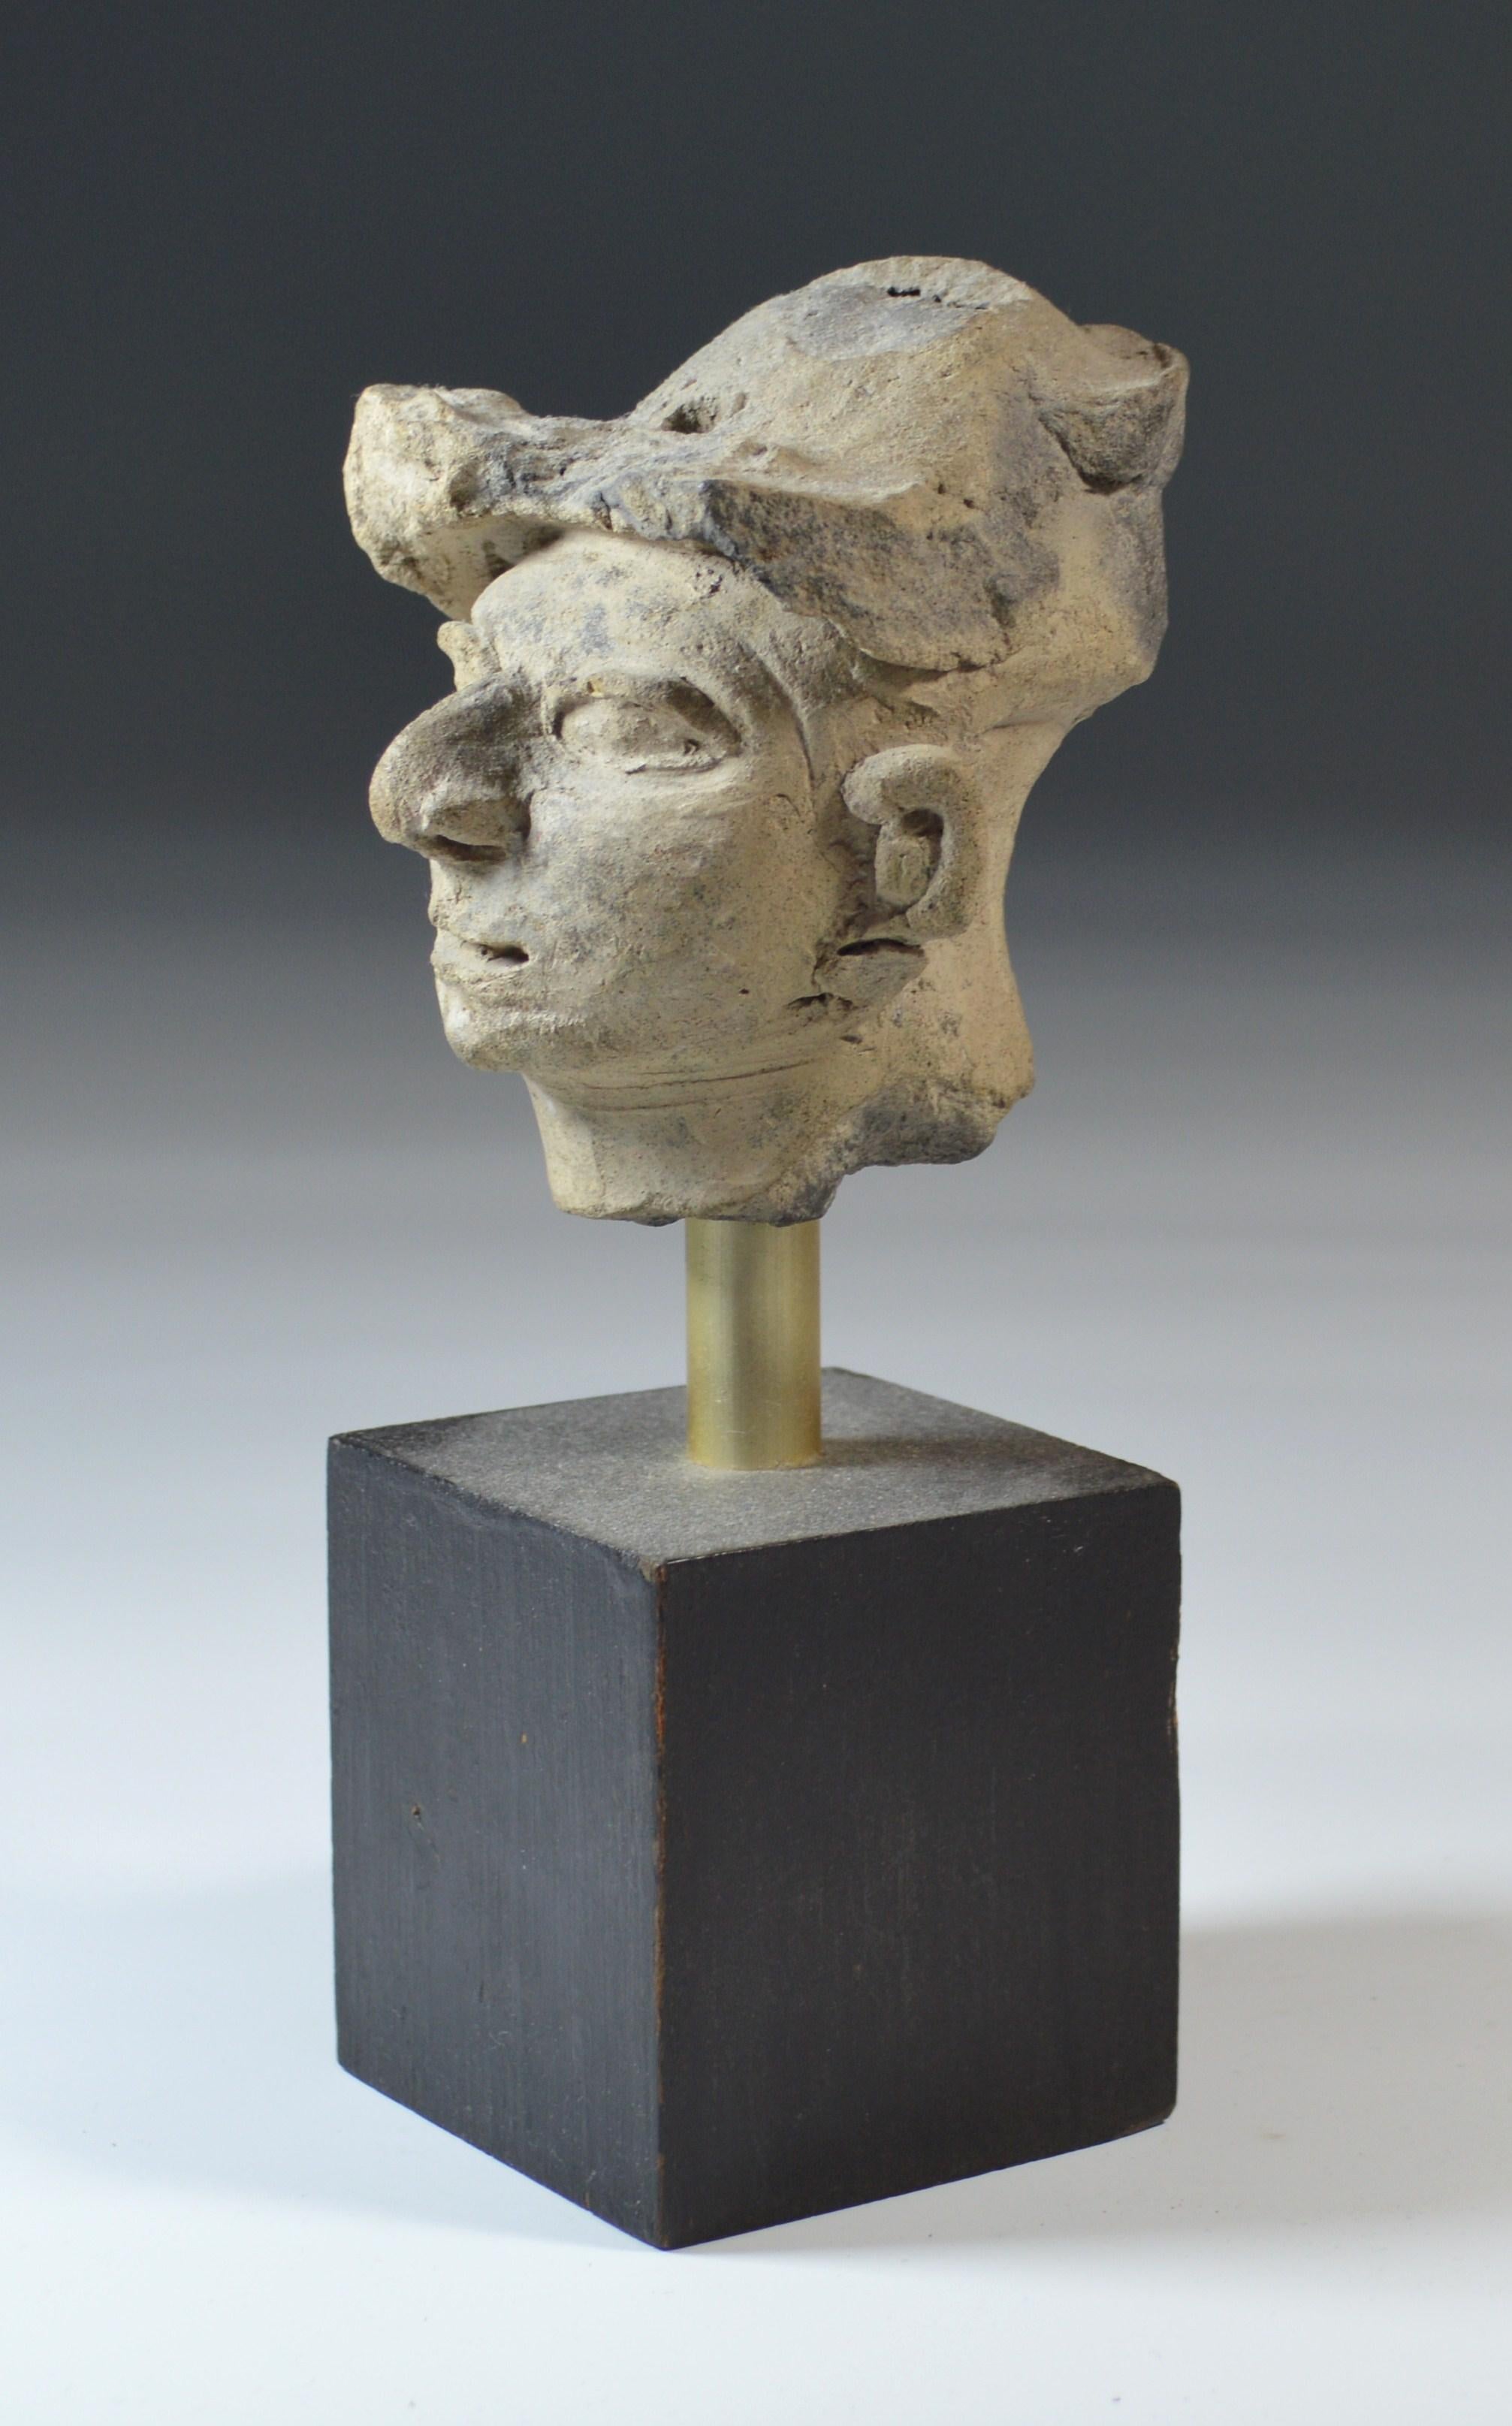 Pre Columbian La Tolita / Tumaco pottery head circa BC 200 Ecuador/ Columbia
A striking very finely modeled grey pottery head with a very expressive face with turban type headdress somewhat reminiscent of a European classical period sculpture.
Size